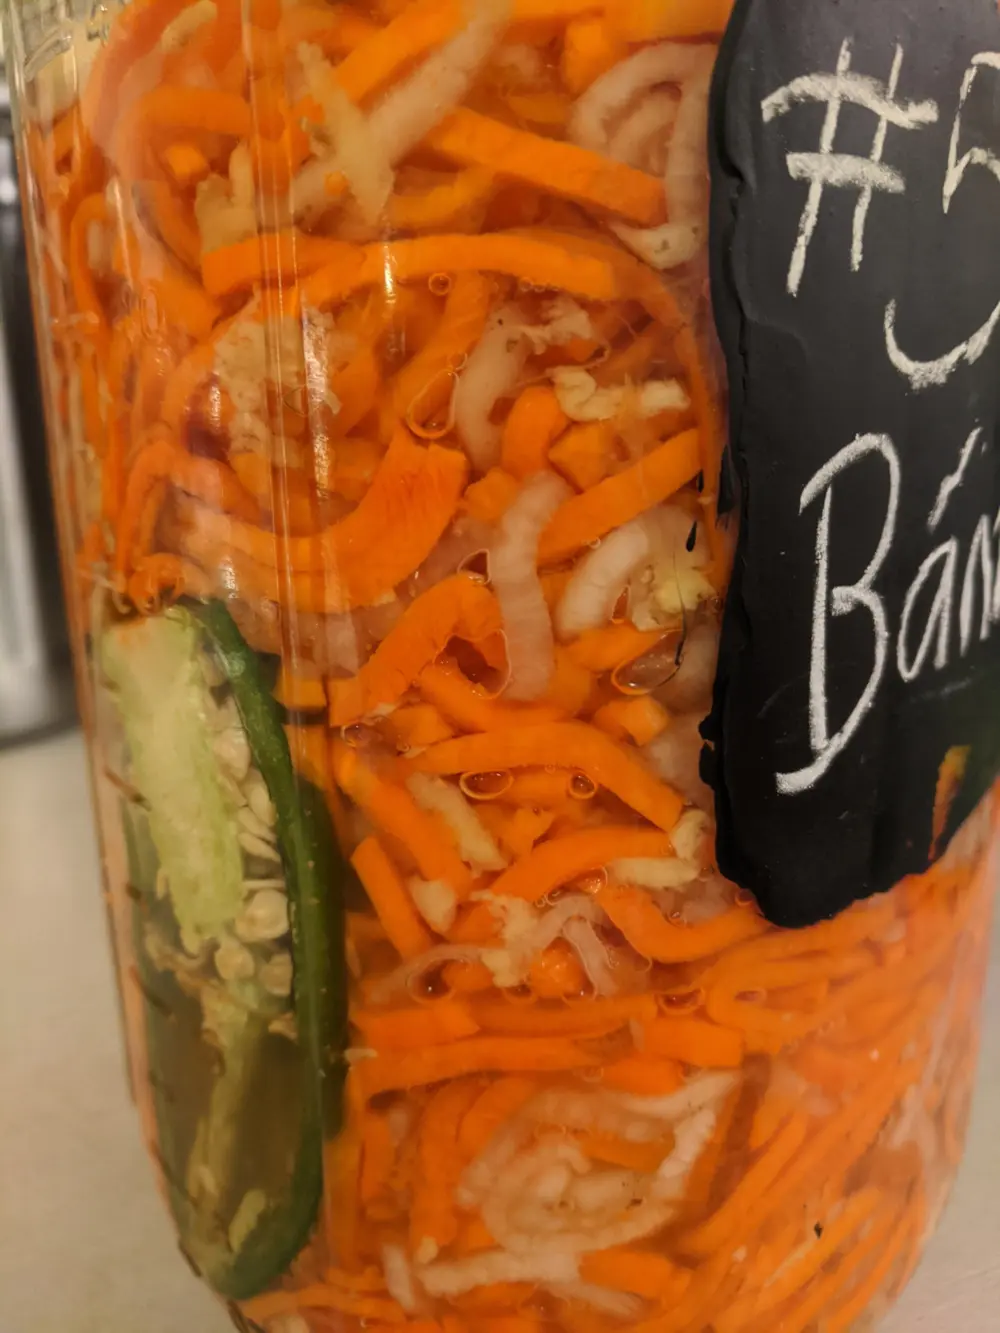 Spiralized carrots & daikon radish, with halved Jalapeno, in the brine ready to ferment.